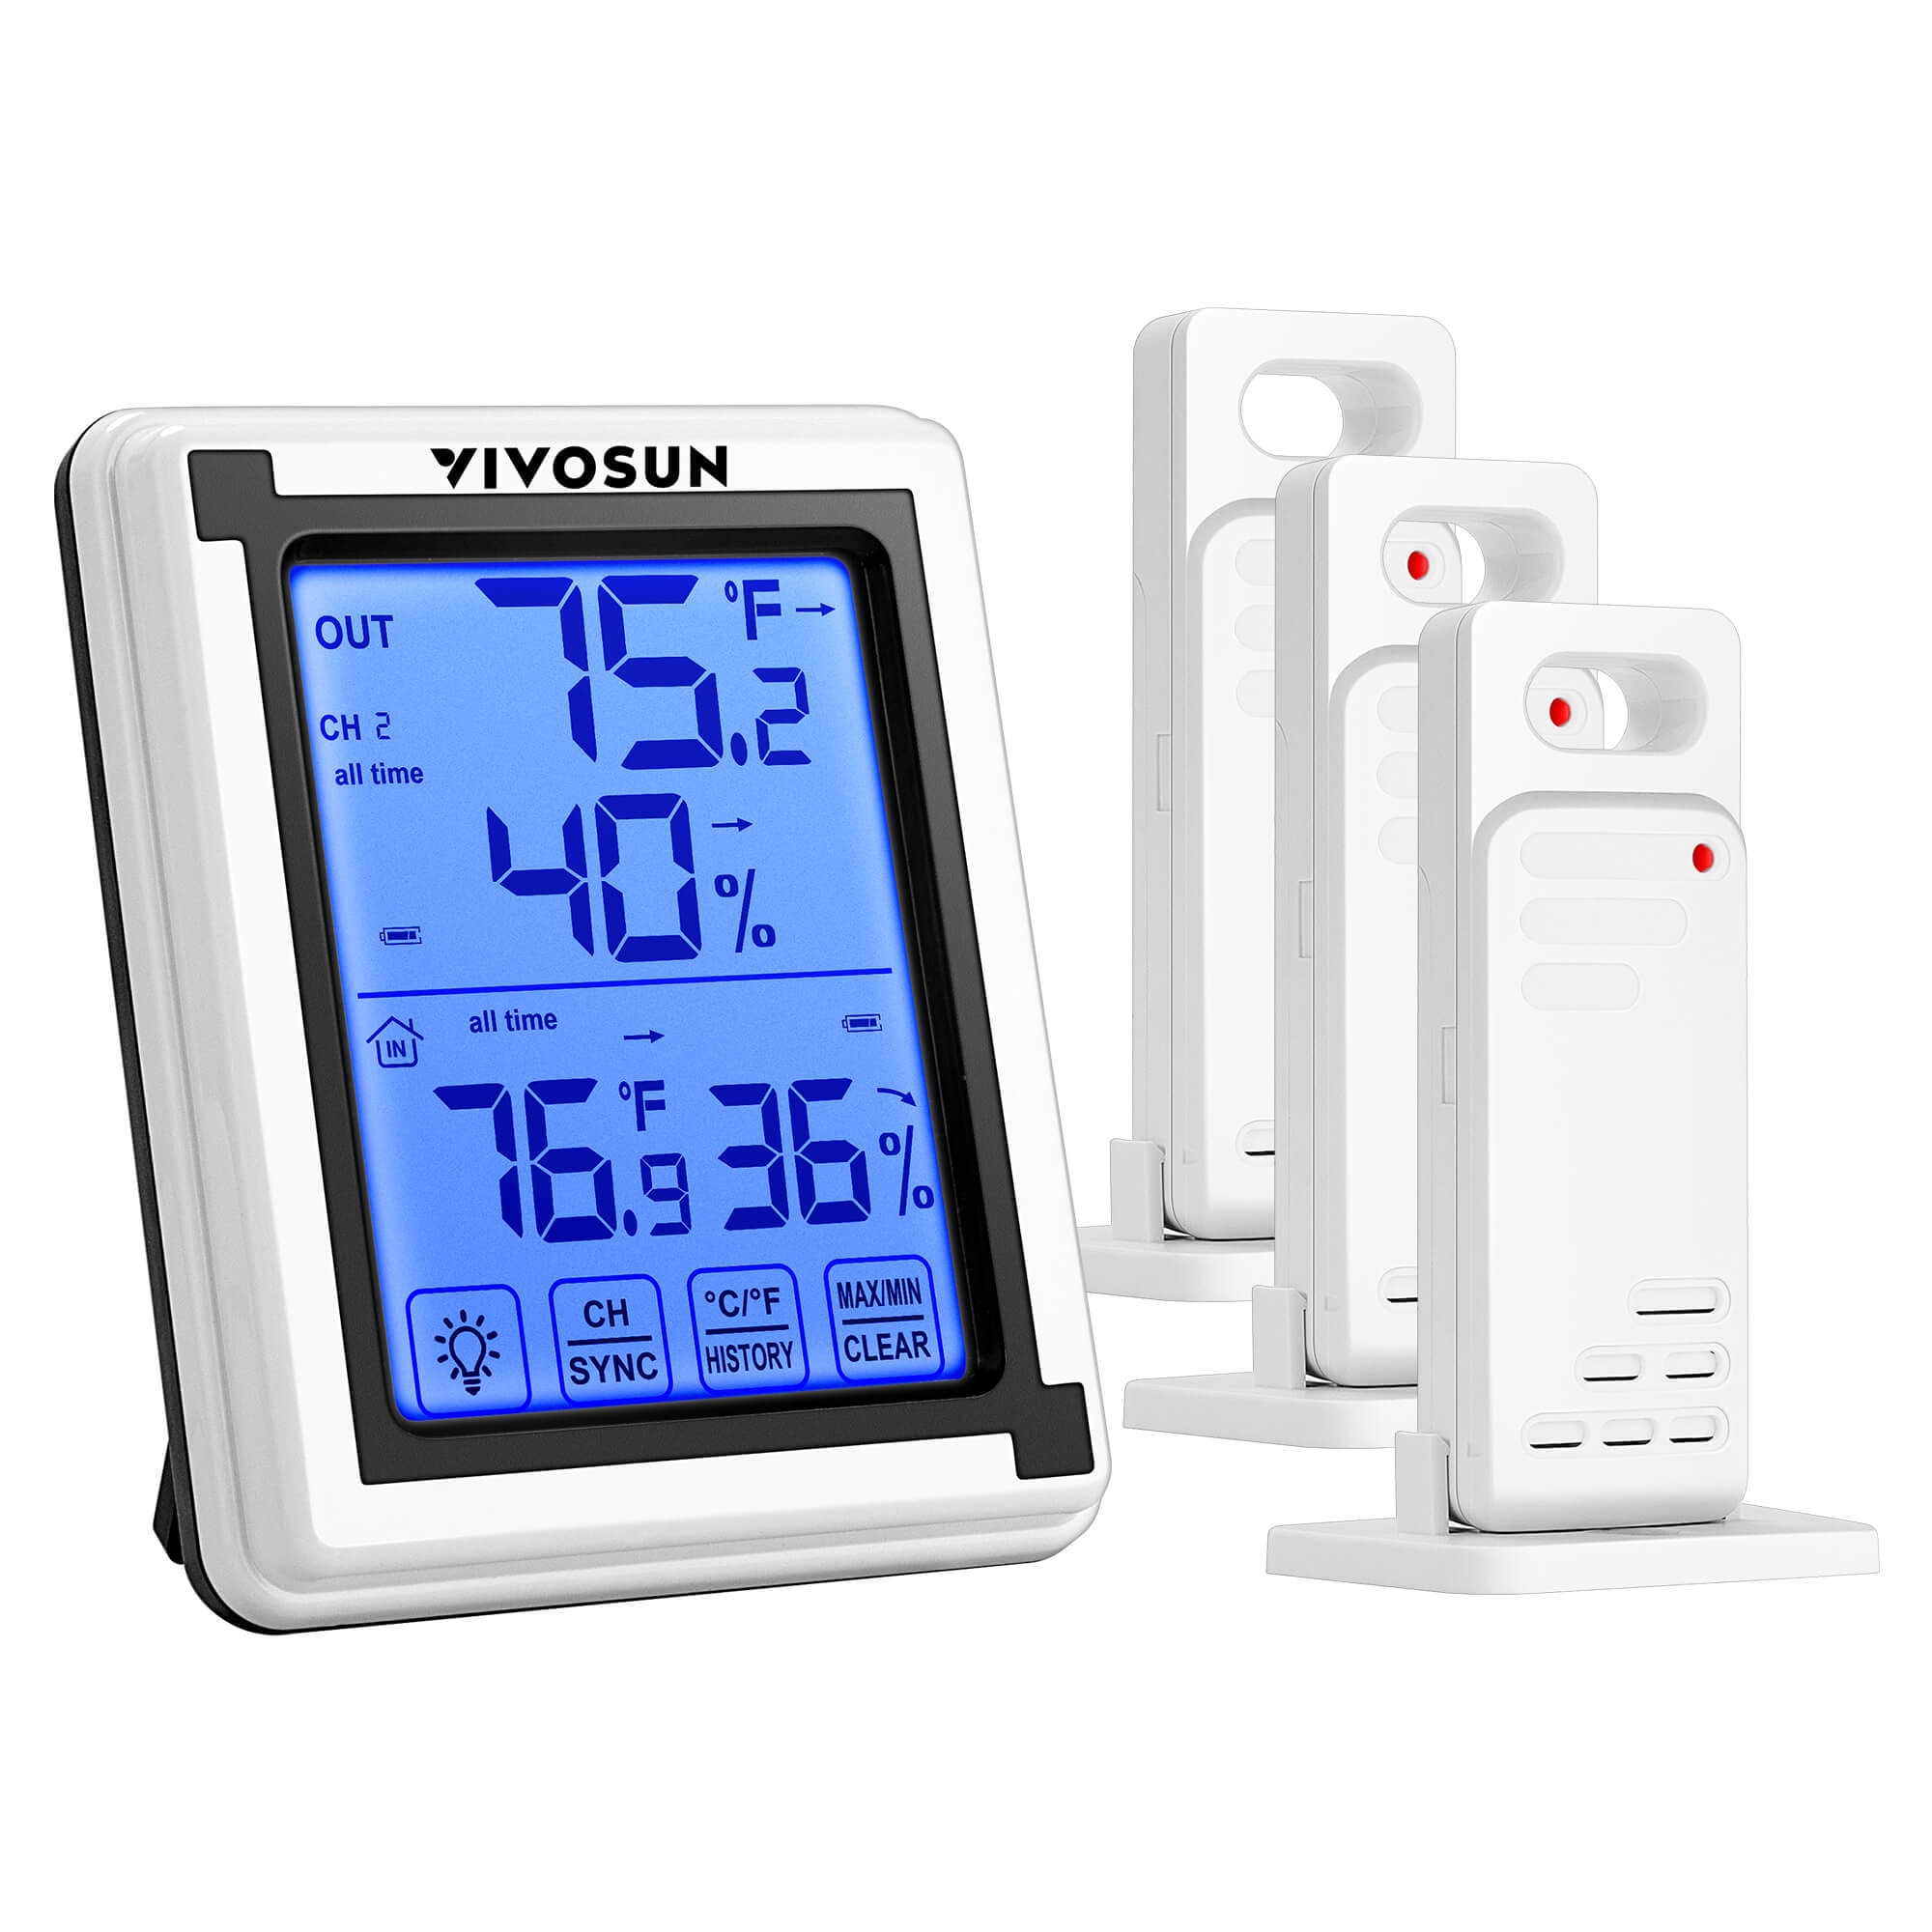 𝟐𝟎𝟐𝟑 𝐍𝐞𝐰 Weather Station Wireless Indoor Outdoor Thermometer,  Digital Color Display Temperature Humidity Monitor with Outdoor Sensor,  Forecast Station